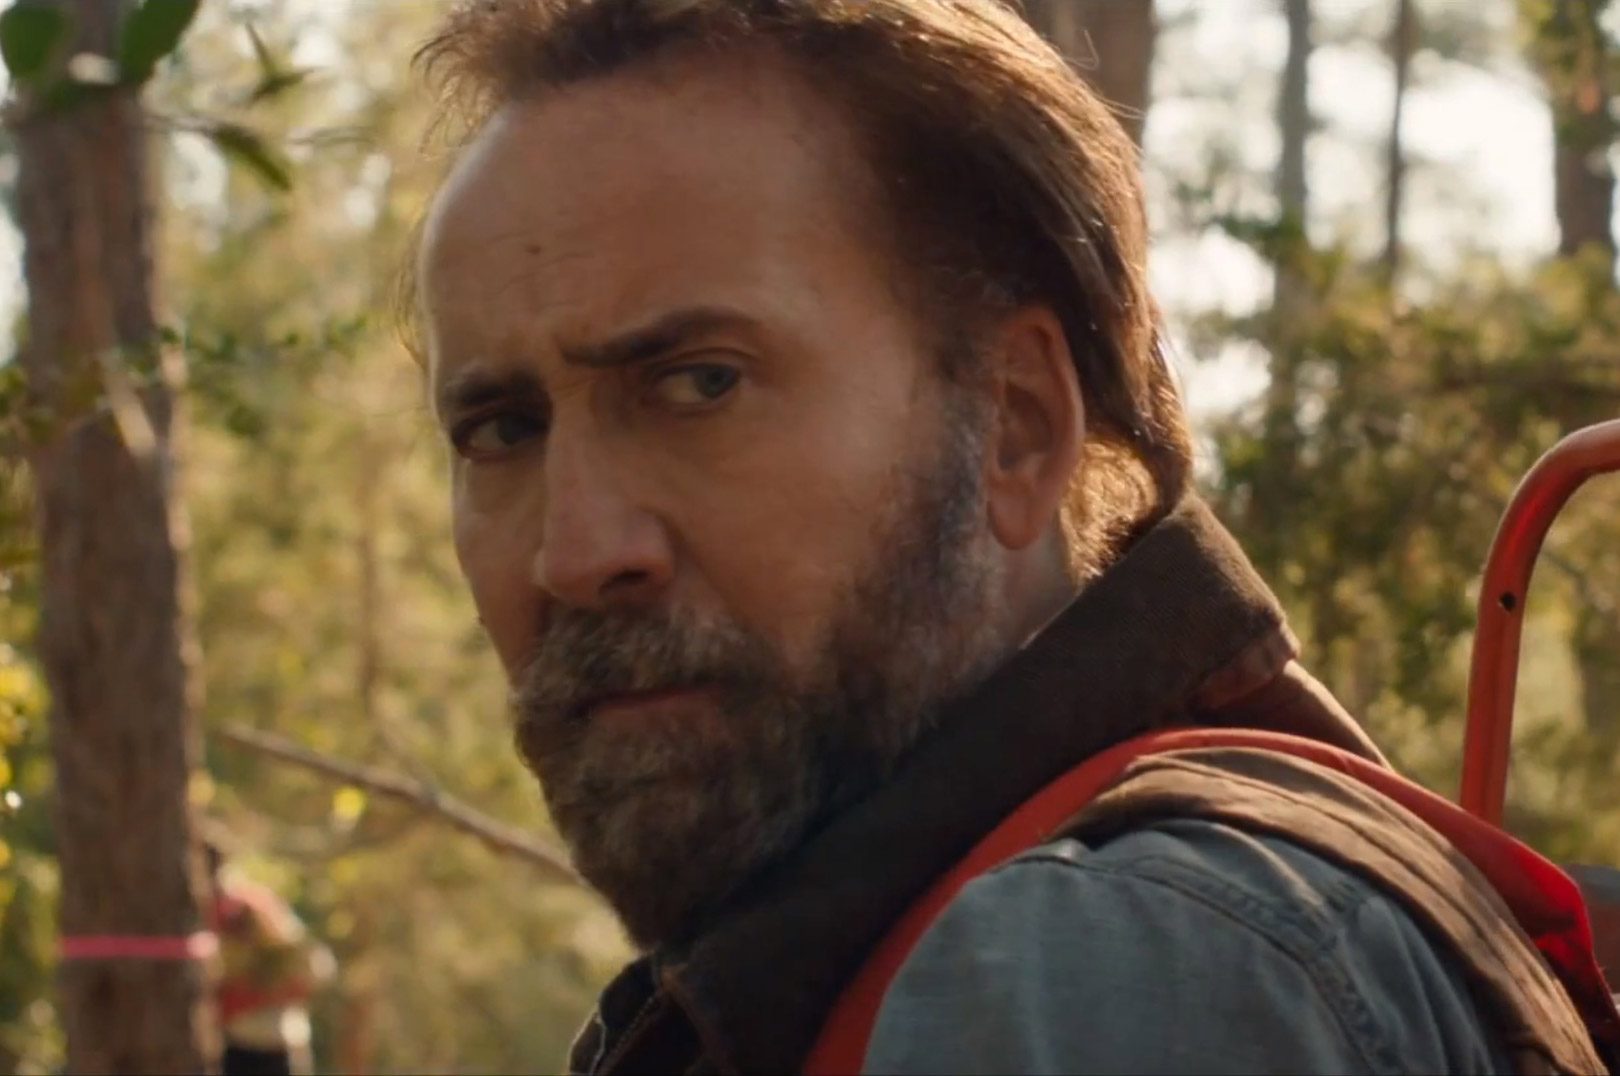 Nic Cage will Star in a Movie Based on a H.P. Lovecraft Story